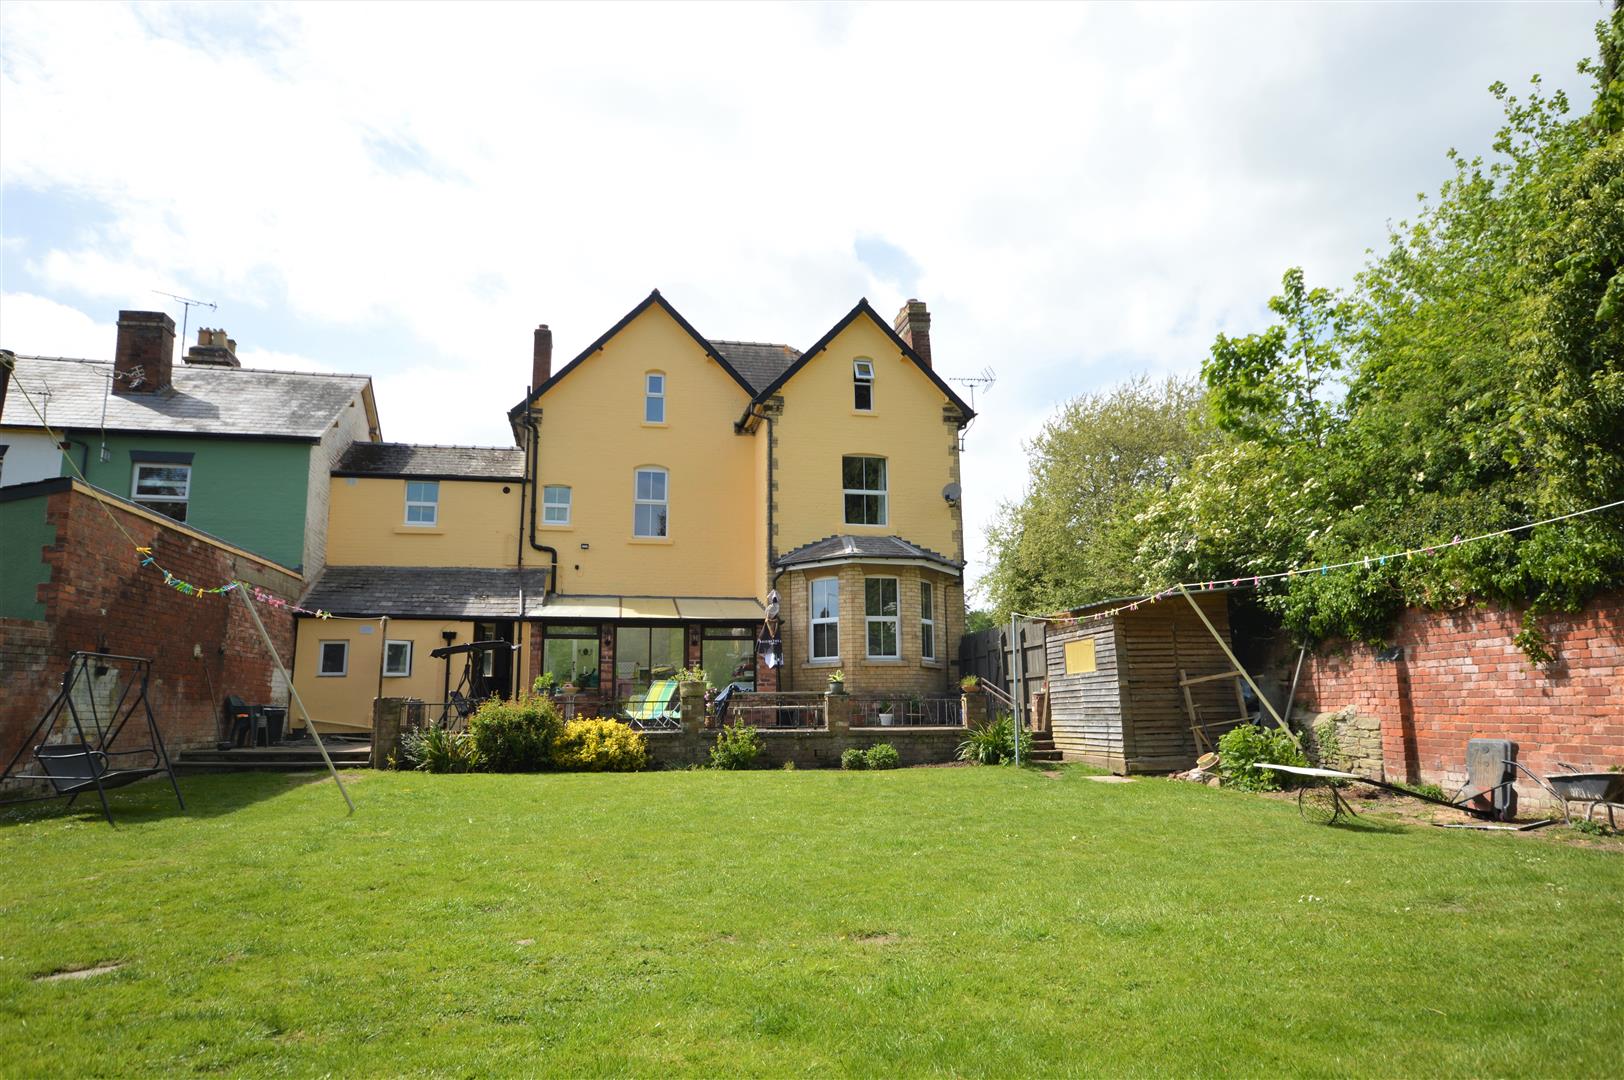 6 bed town house for sale in Leominster 14